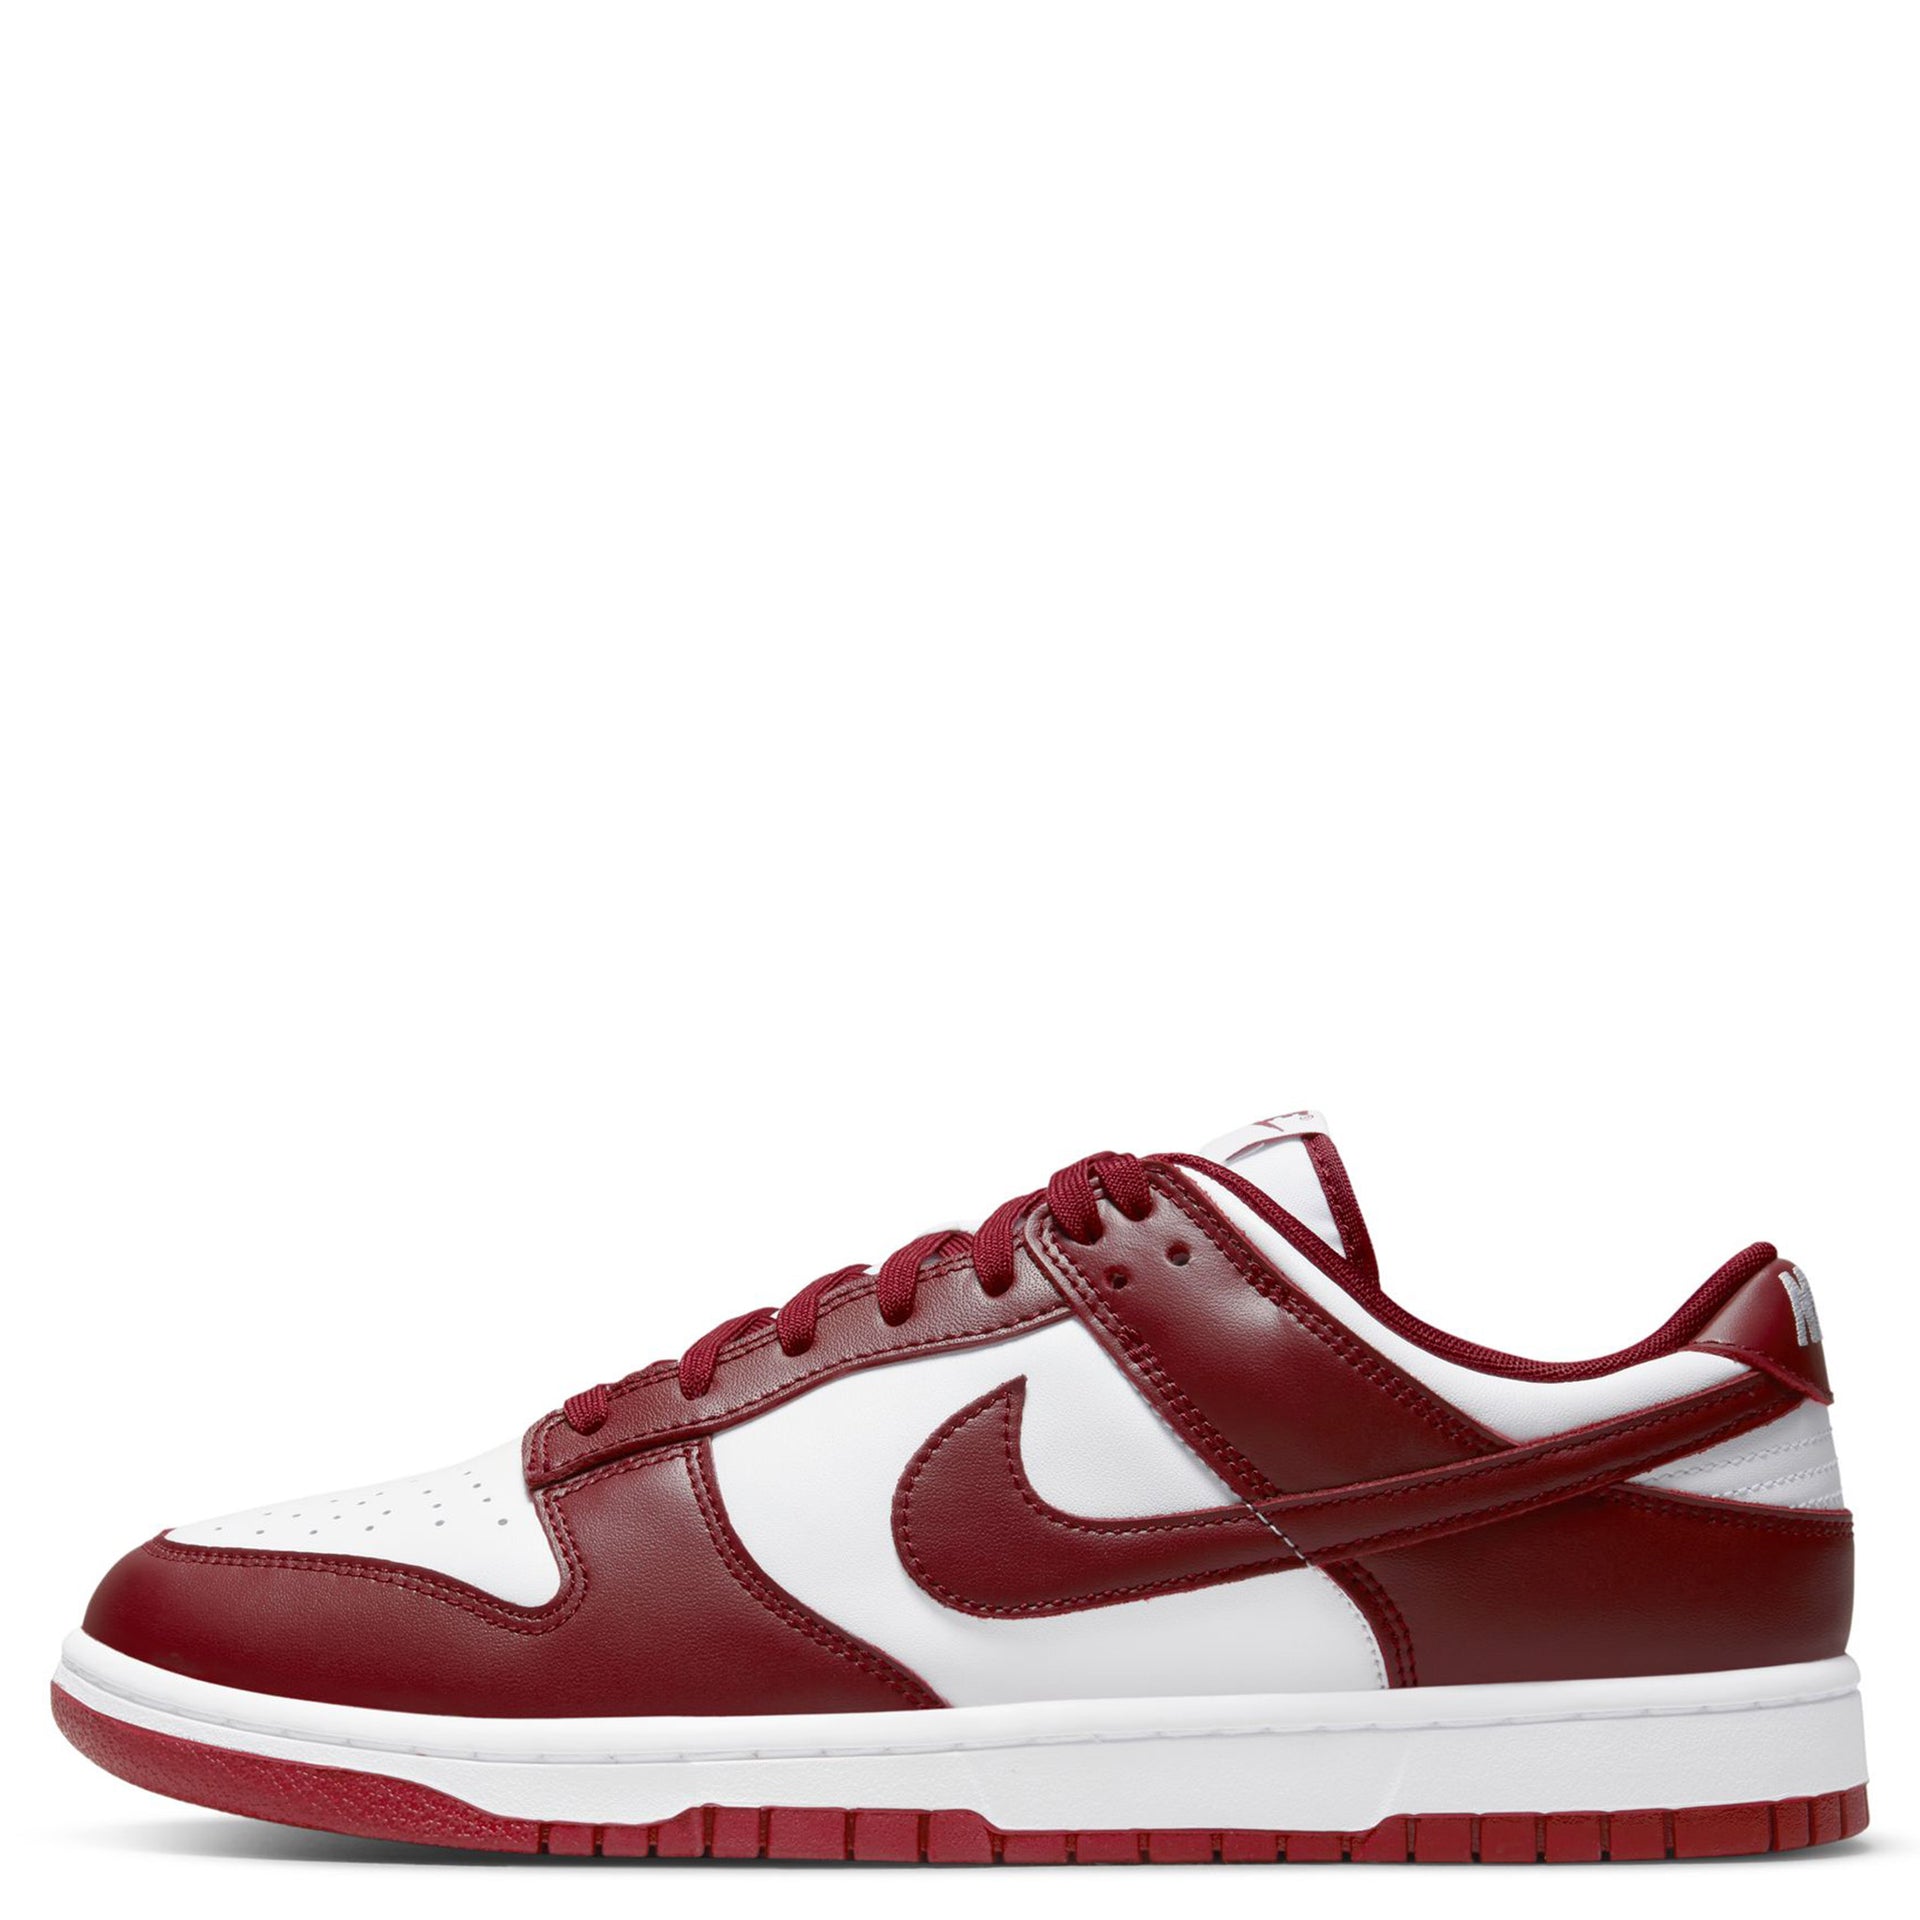 DUNK LOW RETRO / 601:TEAM RED/TEAM RED-WHITE